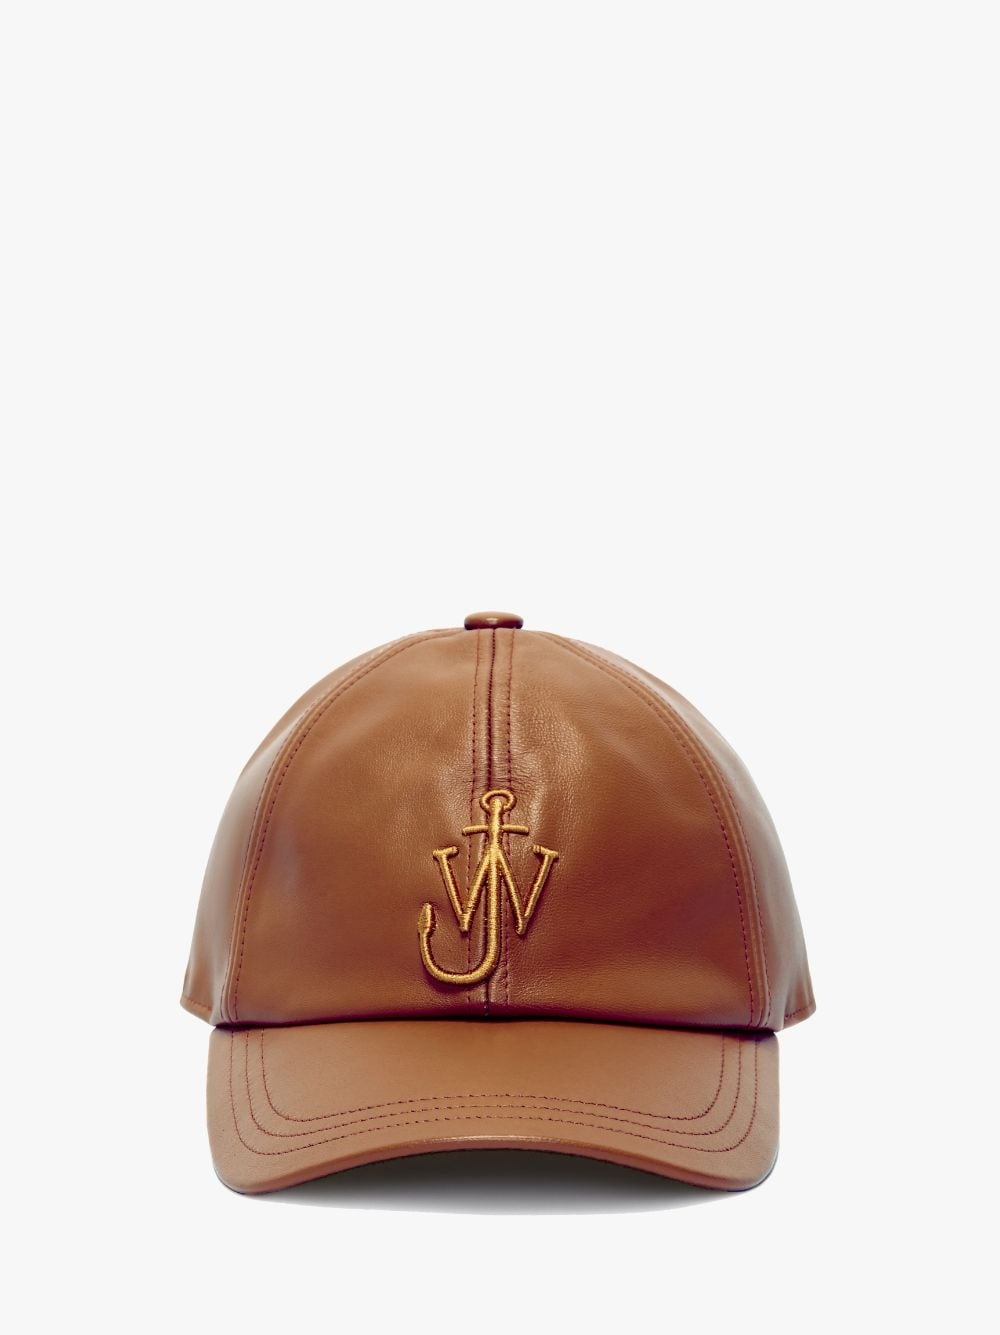 LEATHER BASEBALL CAP WITH ANCHOR LOGO - 1